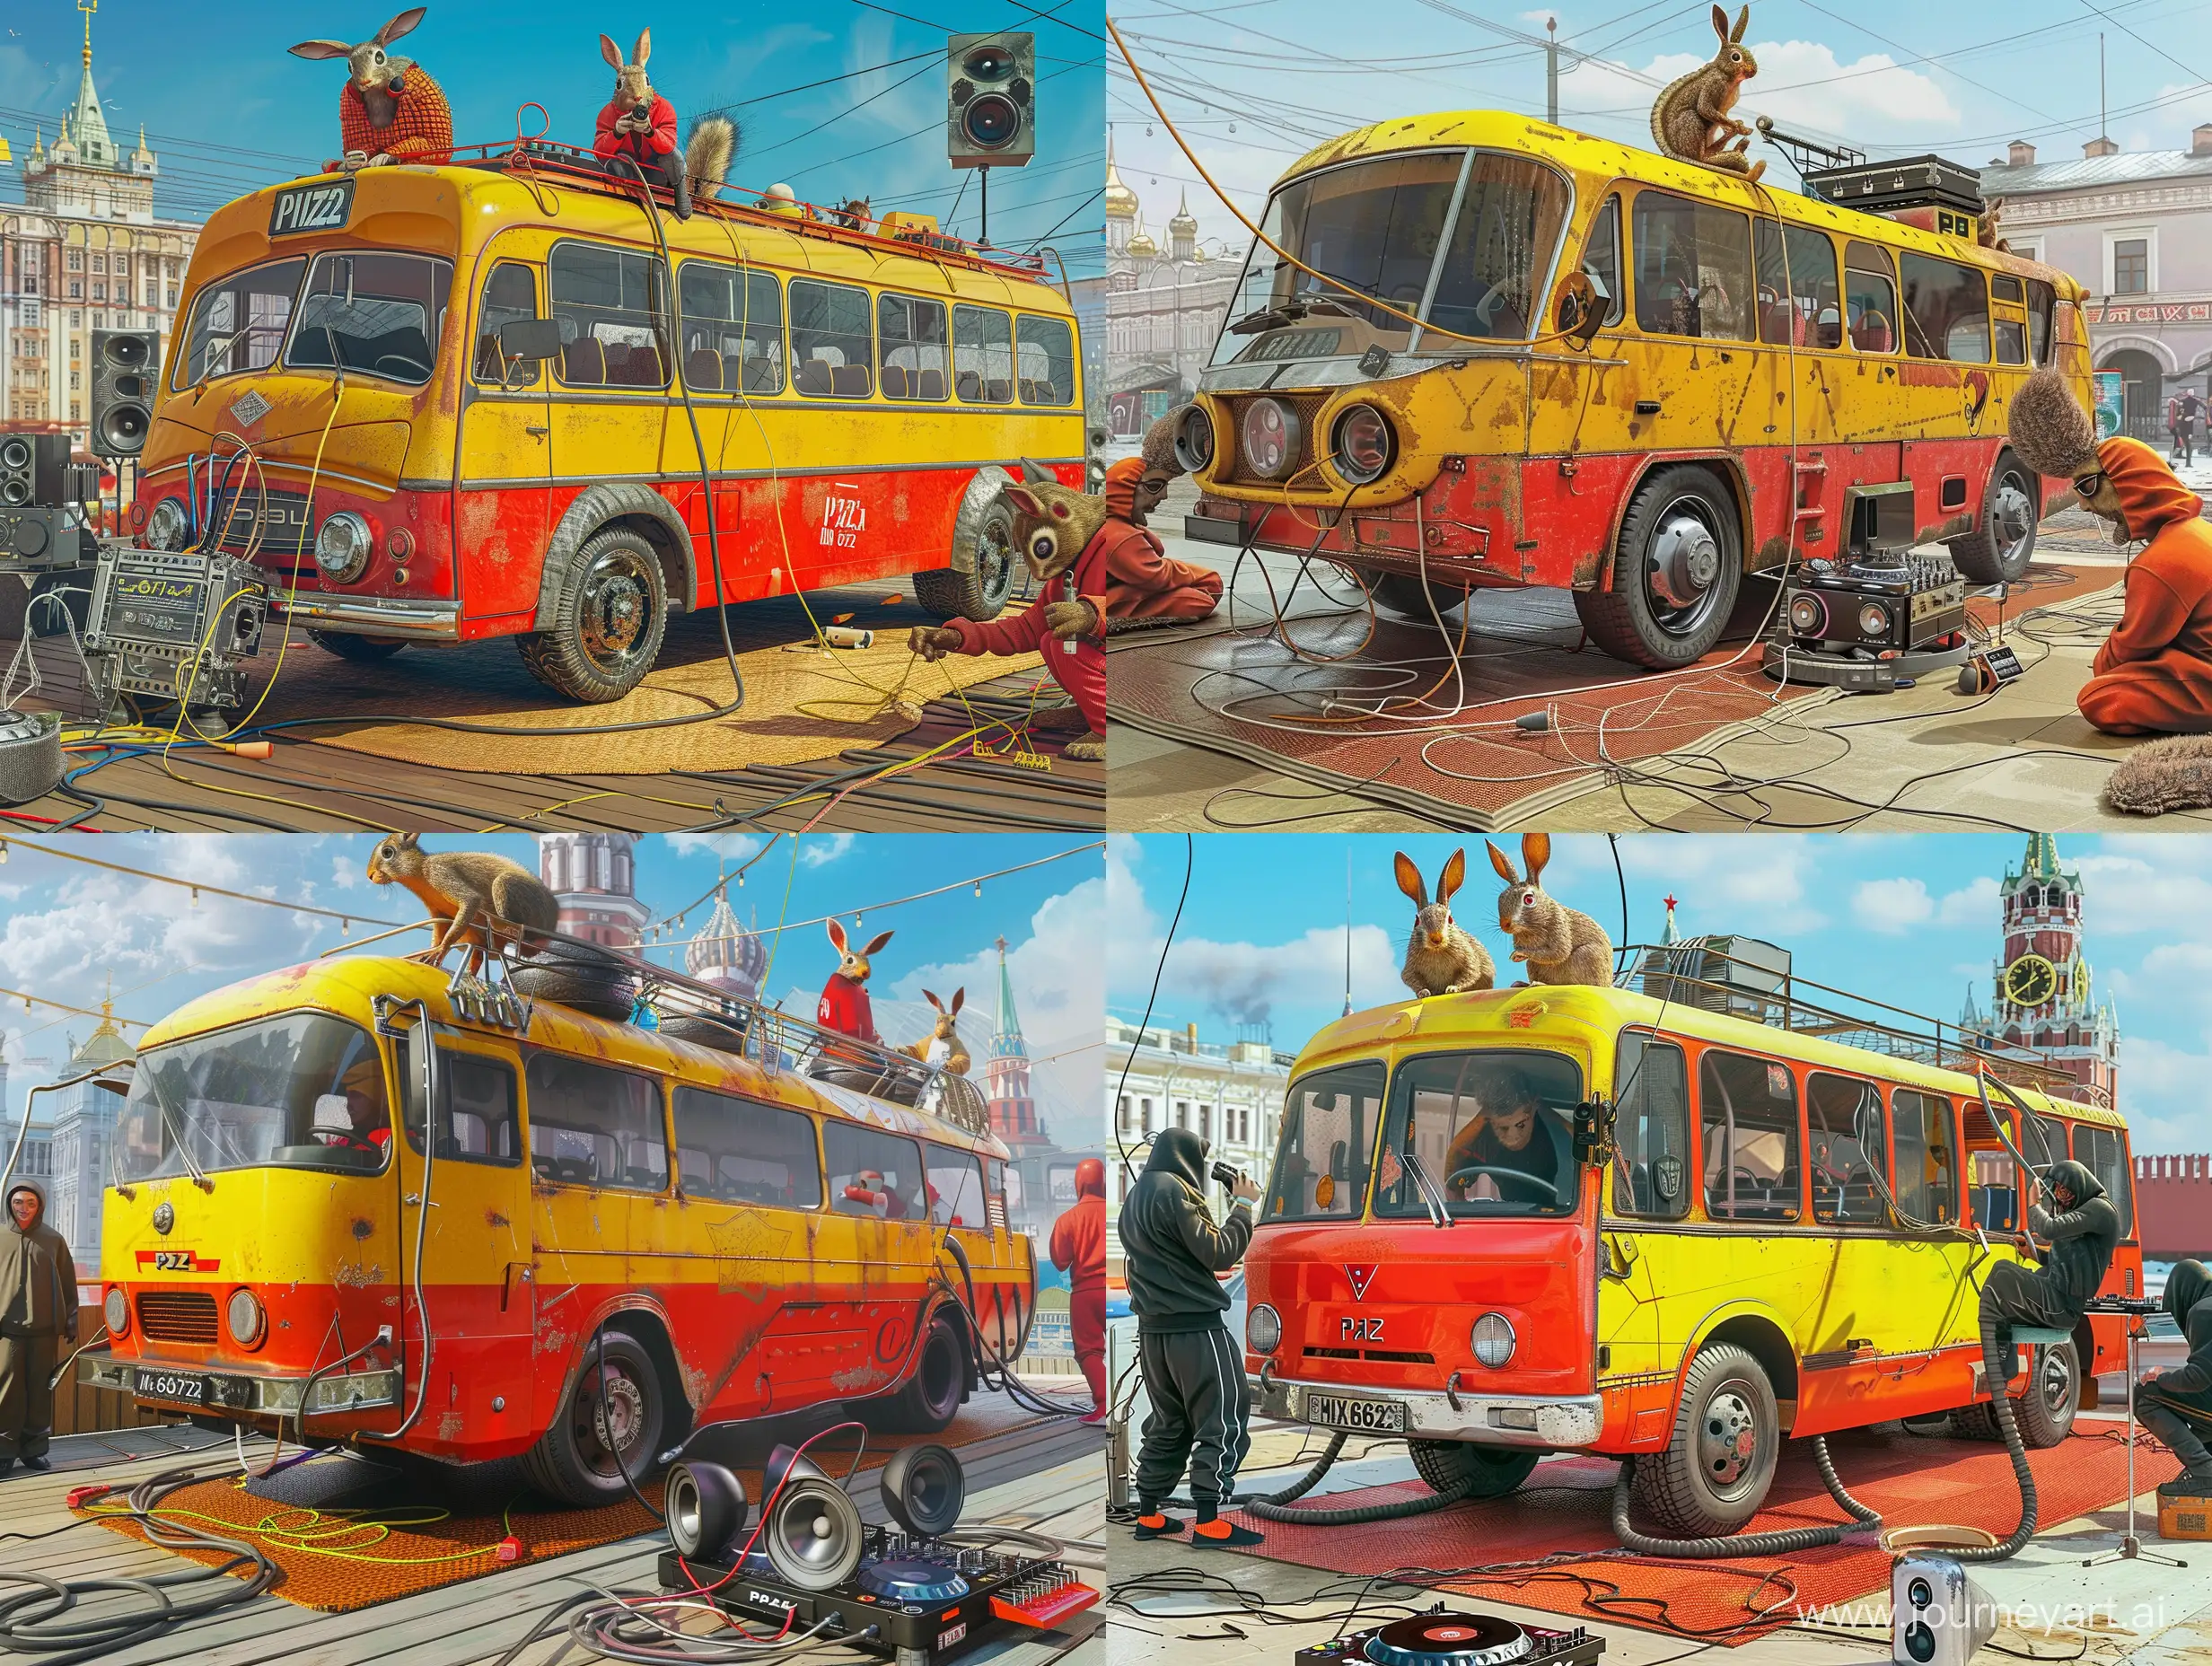 Futuristic-Tuned-Soviet-Bus-with-HareHeaded-Figures-and-DJ-Squirrel-in-Moscow-City